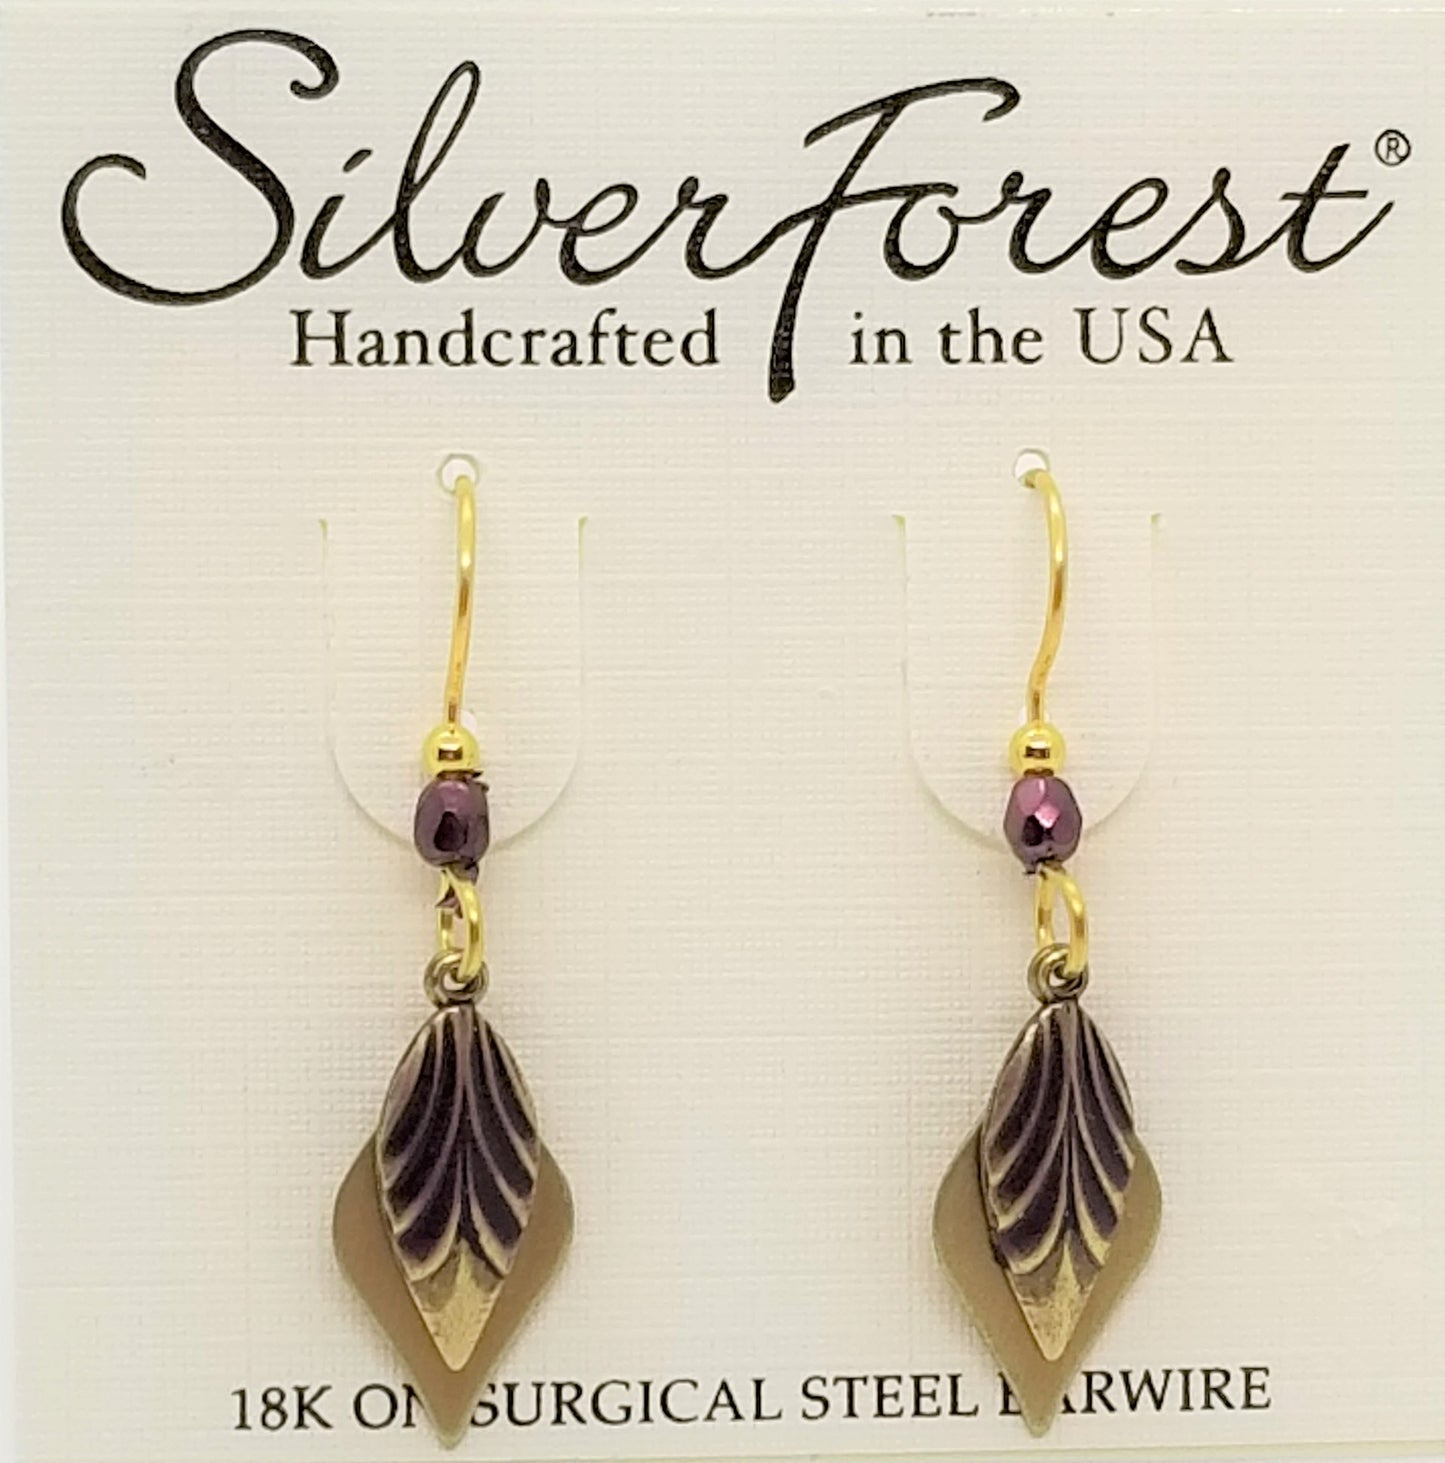 Silver forest 18kt gold plated surgical steel ear wires purple earrings